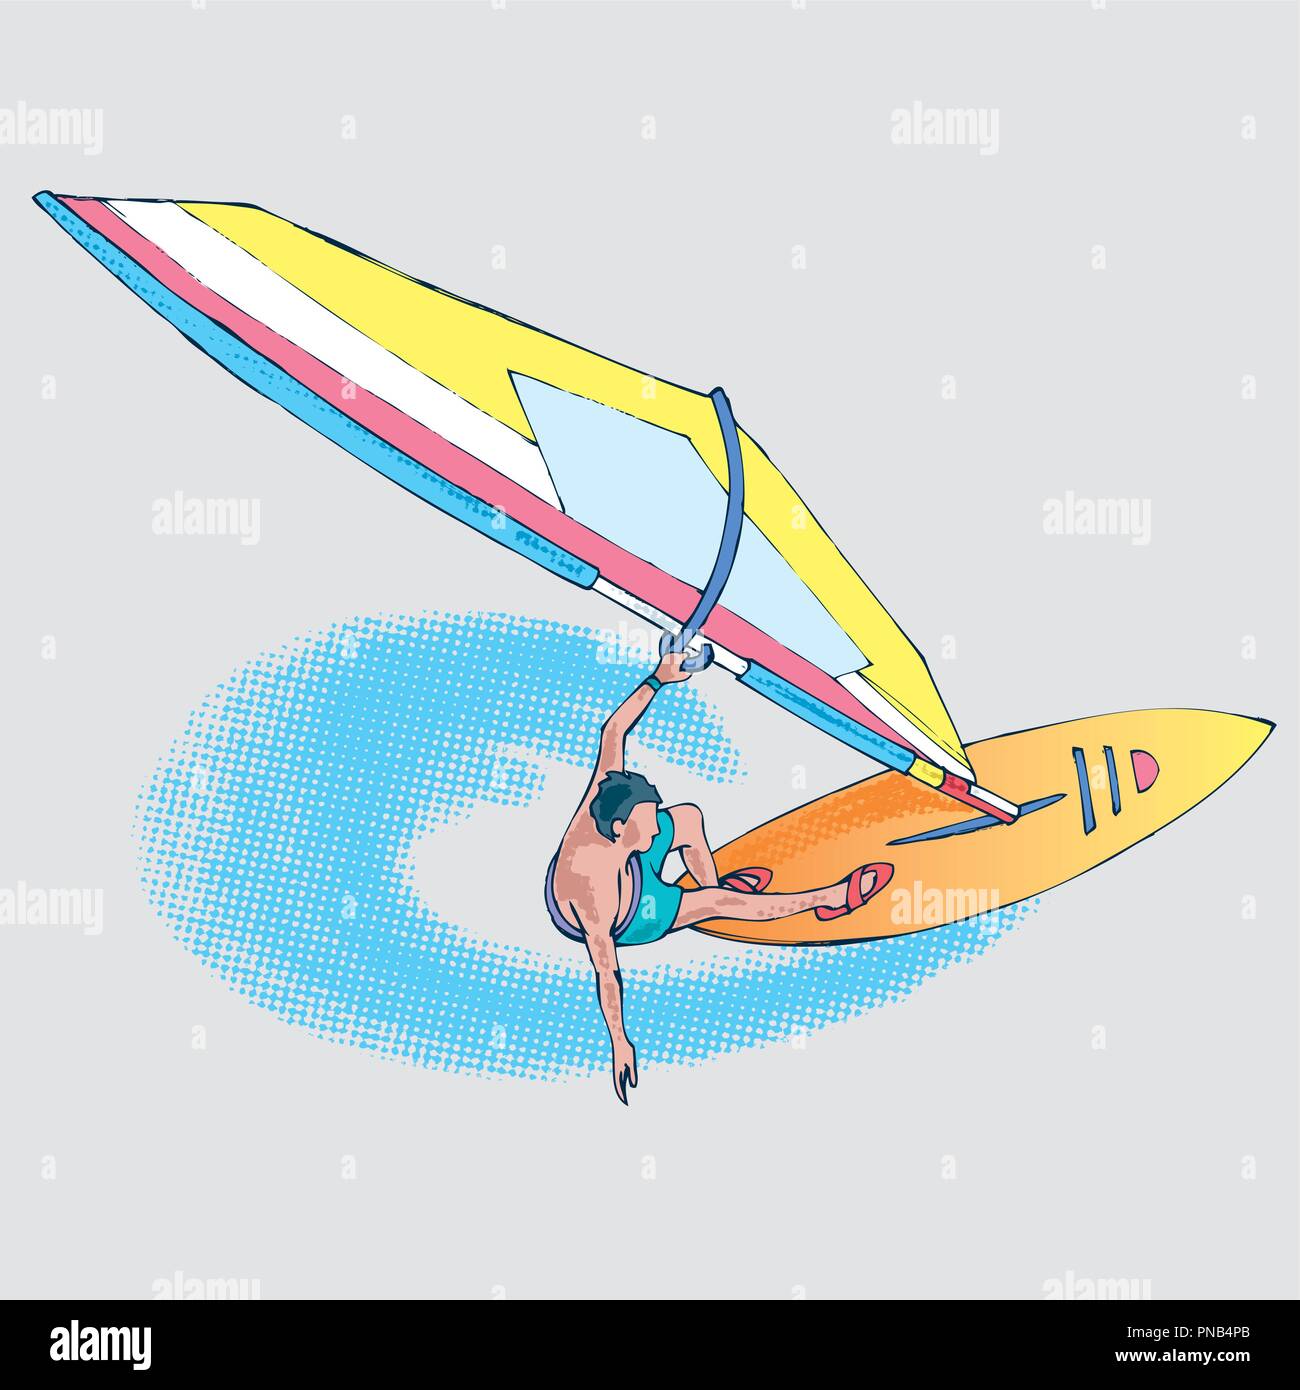 Windsurf athlete on a wave, hand drawing Stock Vector